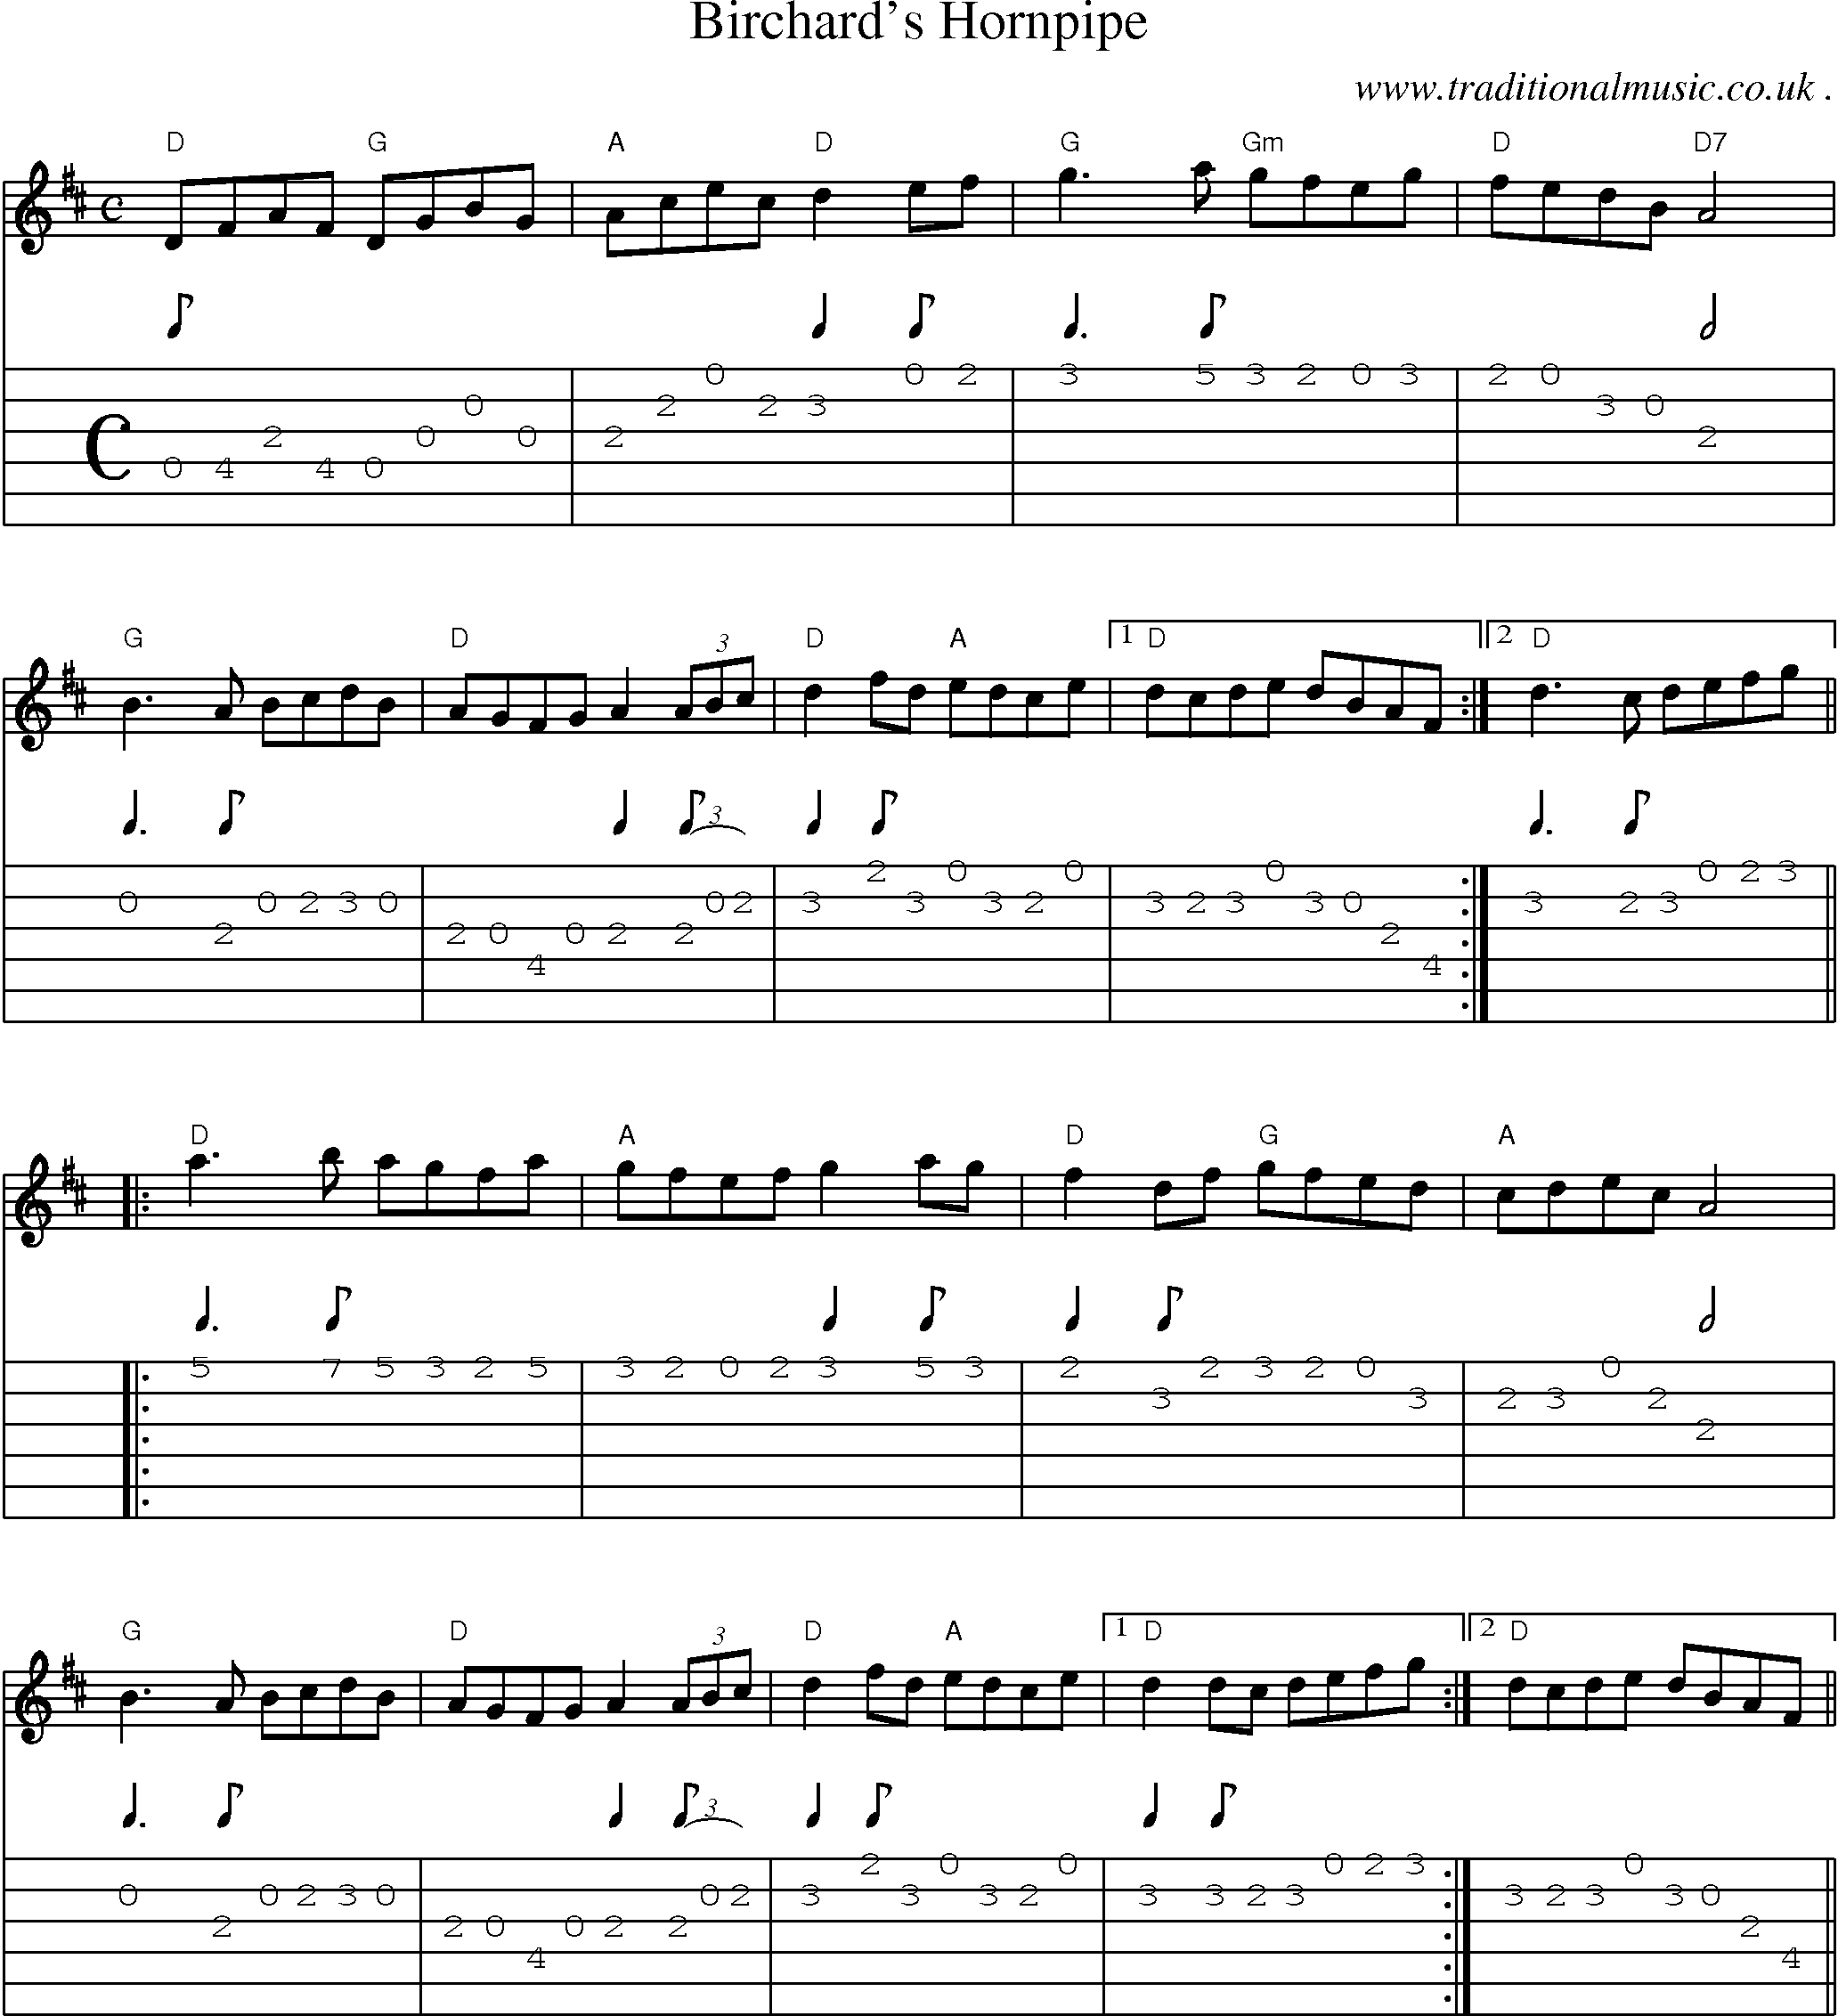 Music Score and Guitar Tabs for Birchards Hornpipe